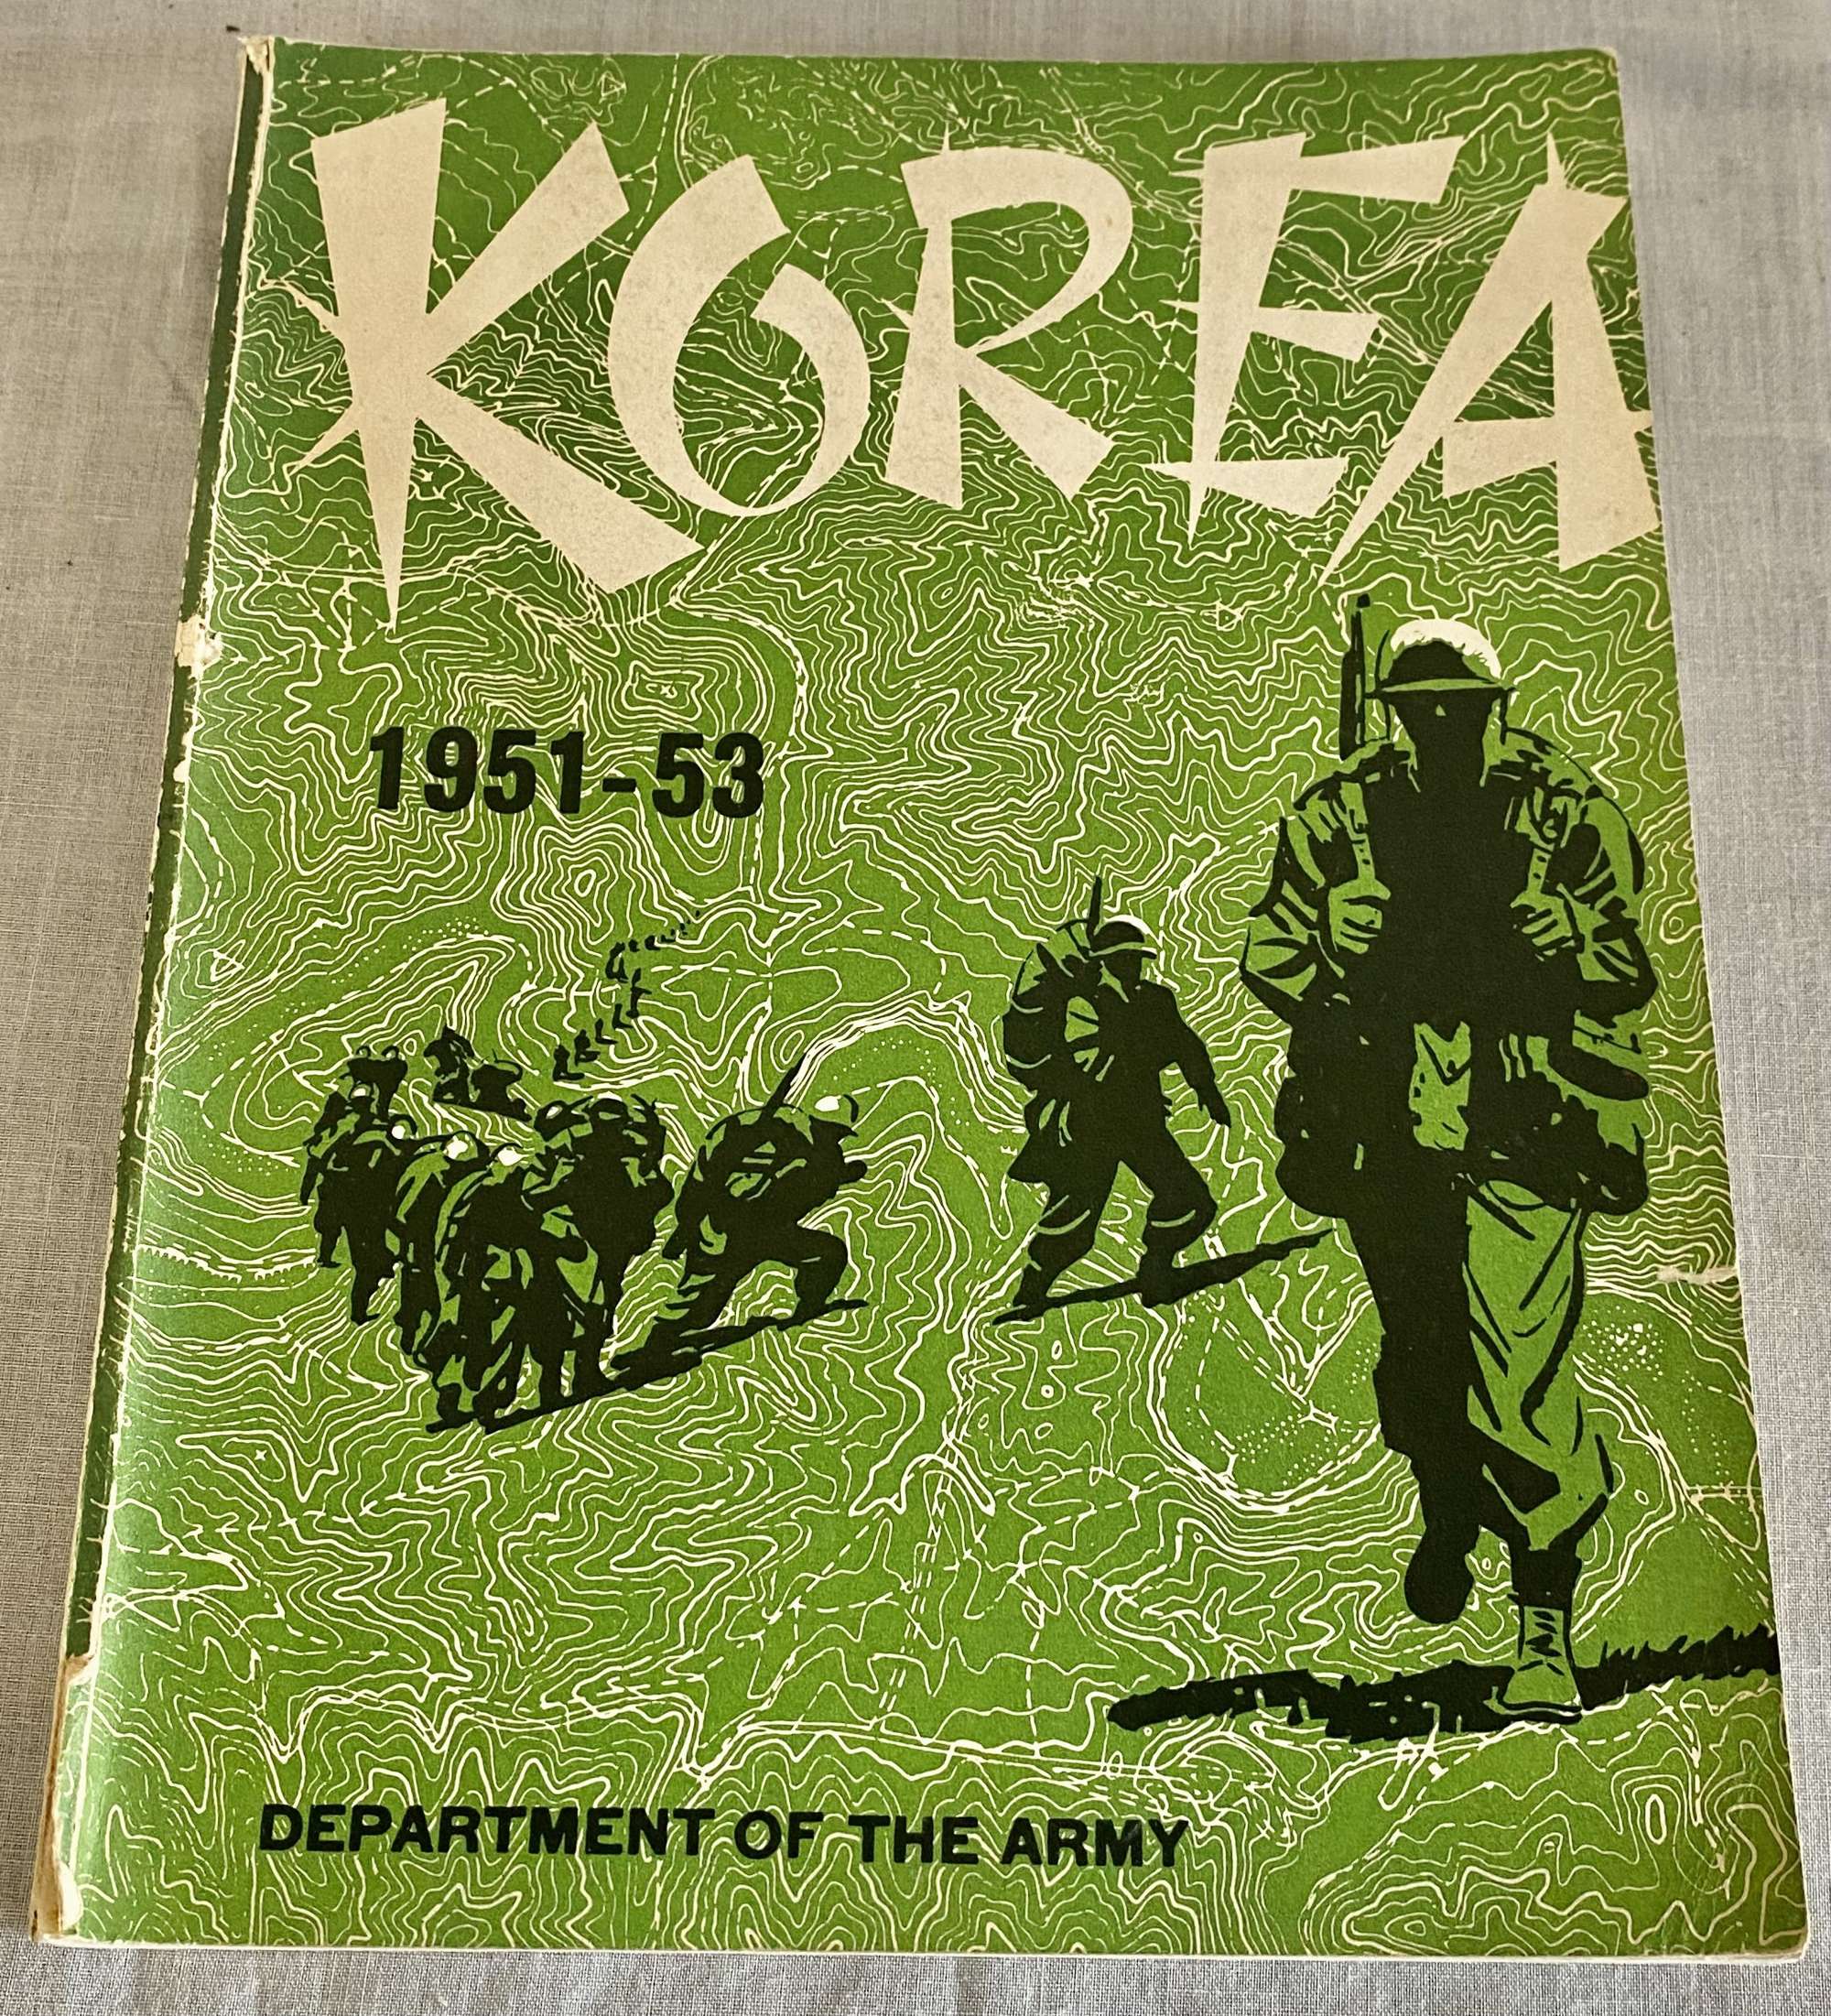 US Military Department of the Army Korea 1951-53 Booklet